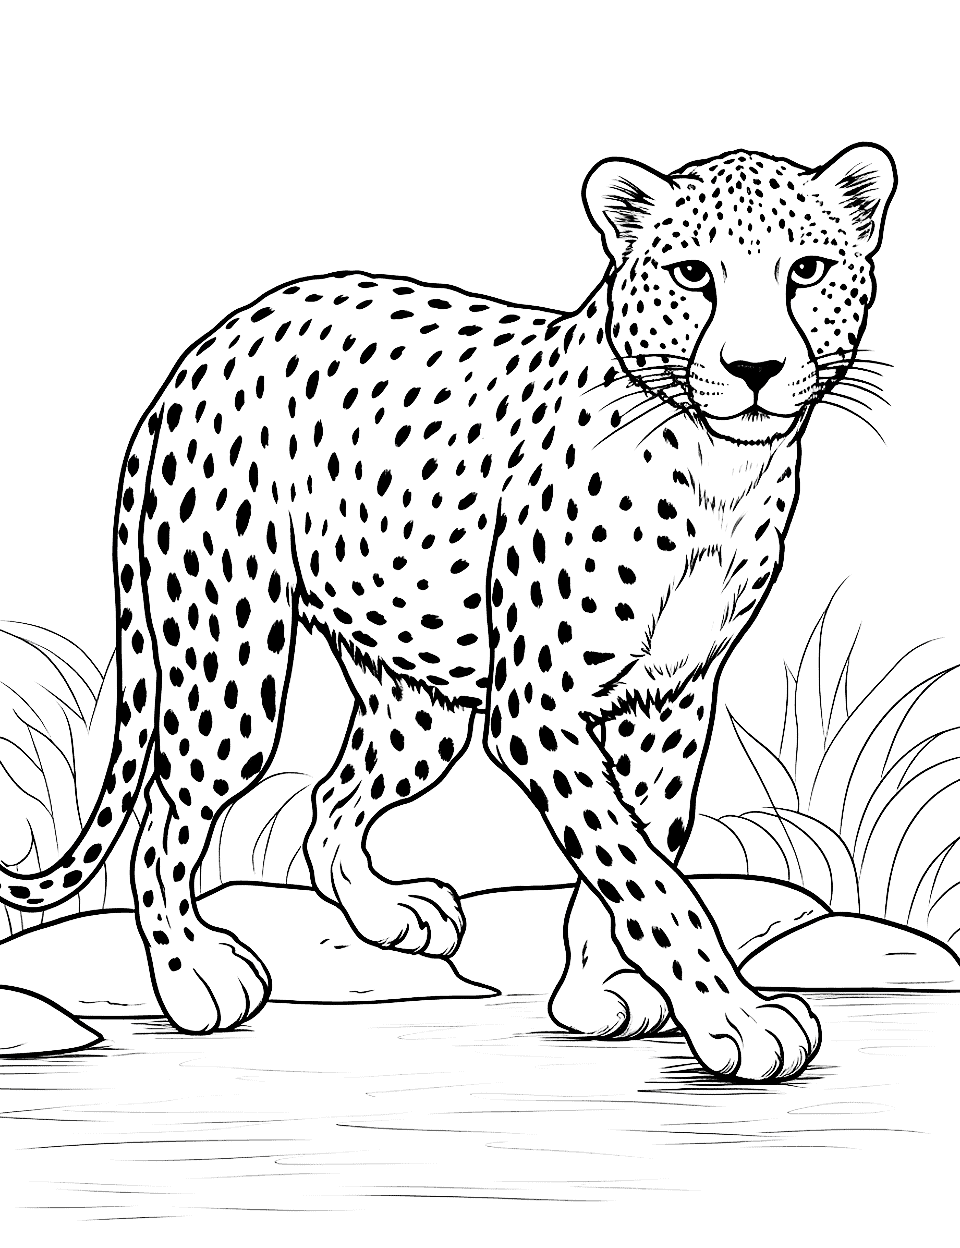 Cheetah Crossing a Stream Coloring Page - A cheetah carefully crossing a shallow stream.